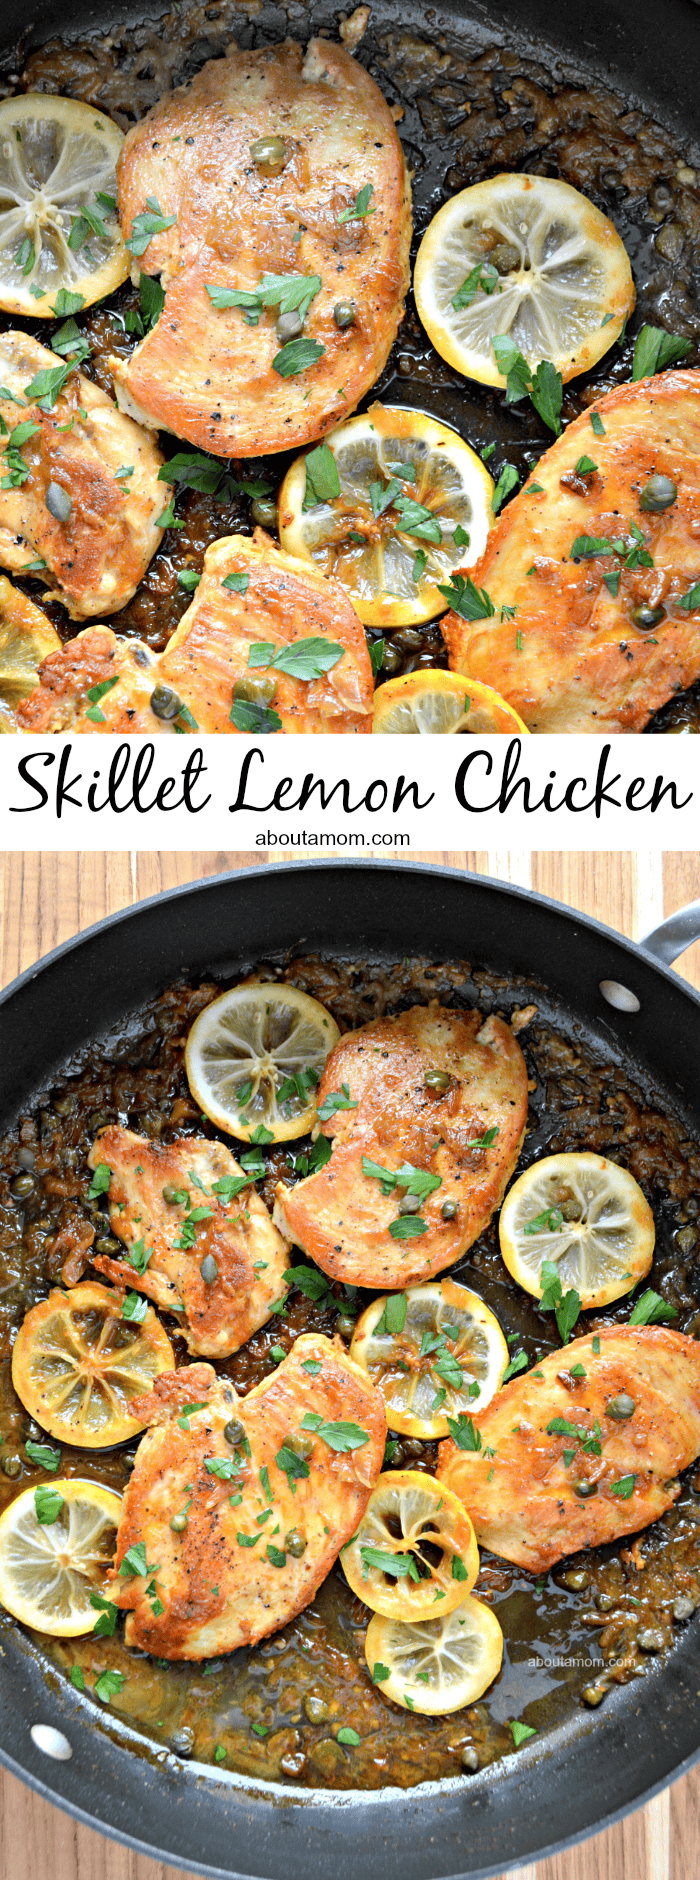 Sauteed chicken in a buttery lemon sauce with caper and sliced lemon. This flavorful skillet lemon chicken recipe comes together quickly and is perfect for a busy weeknight.